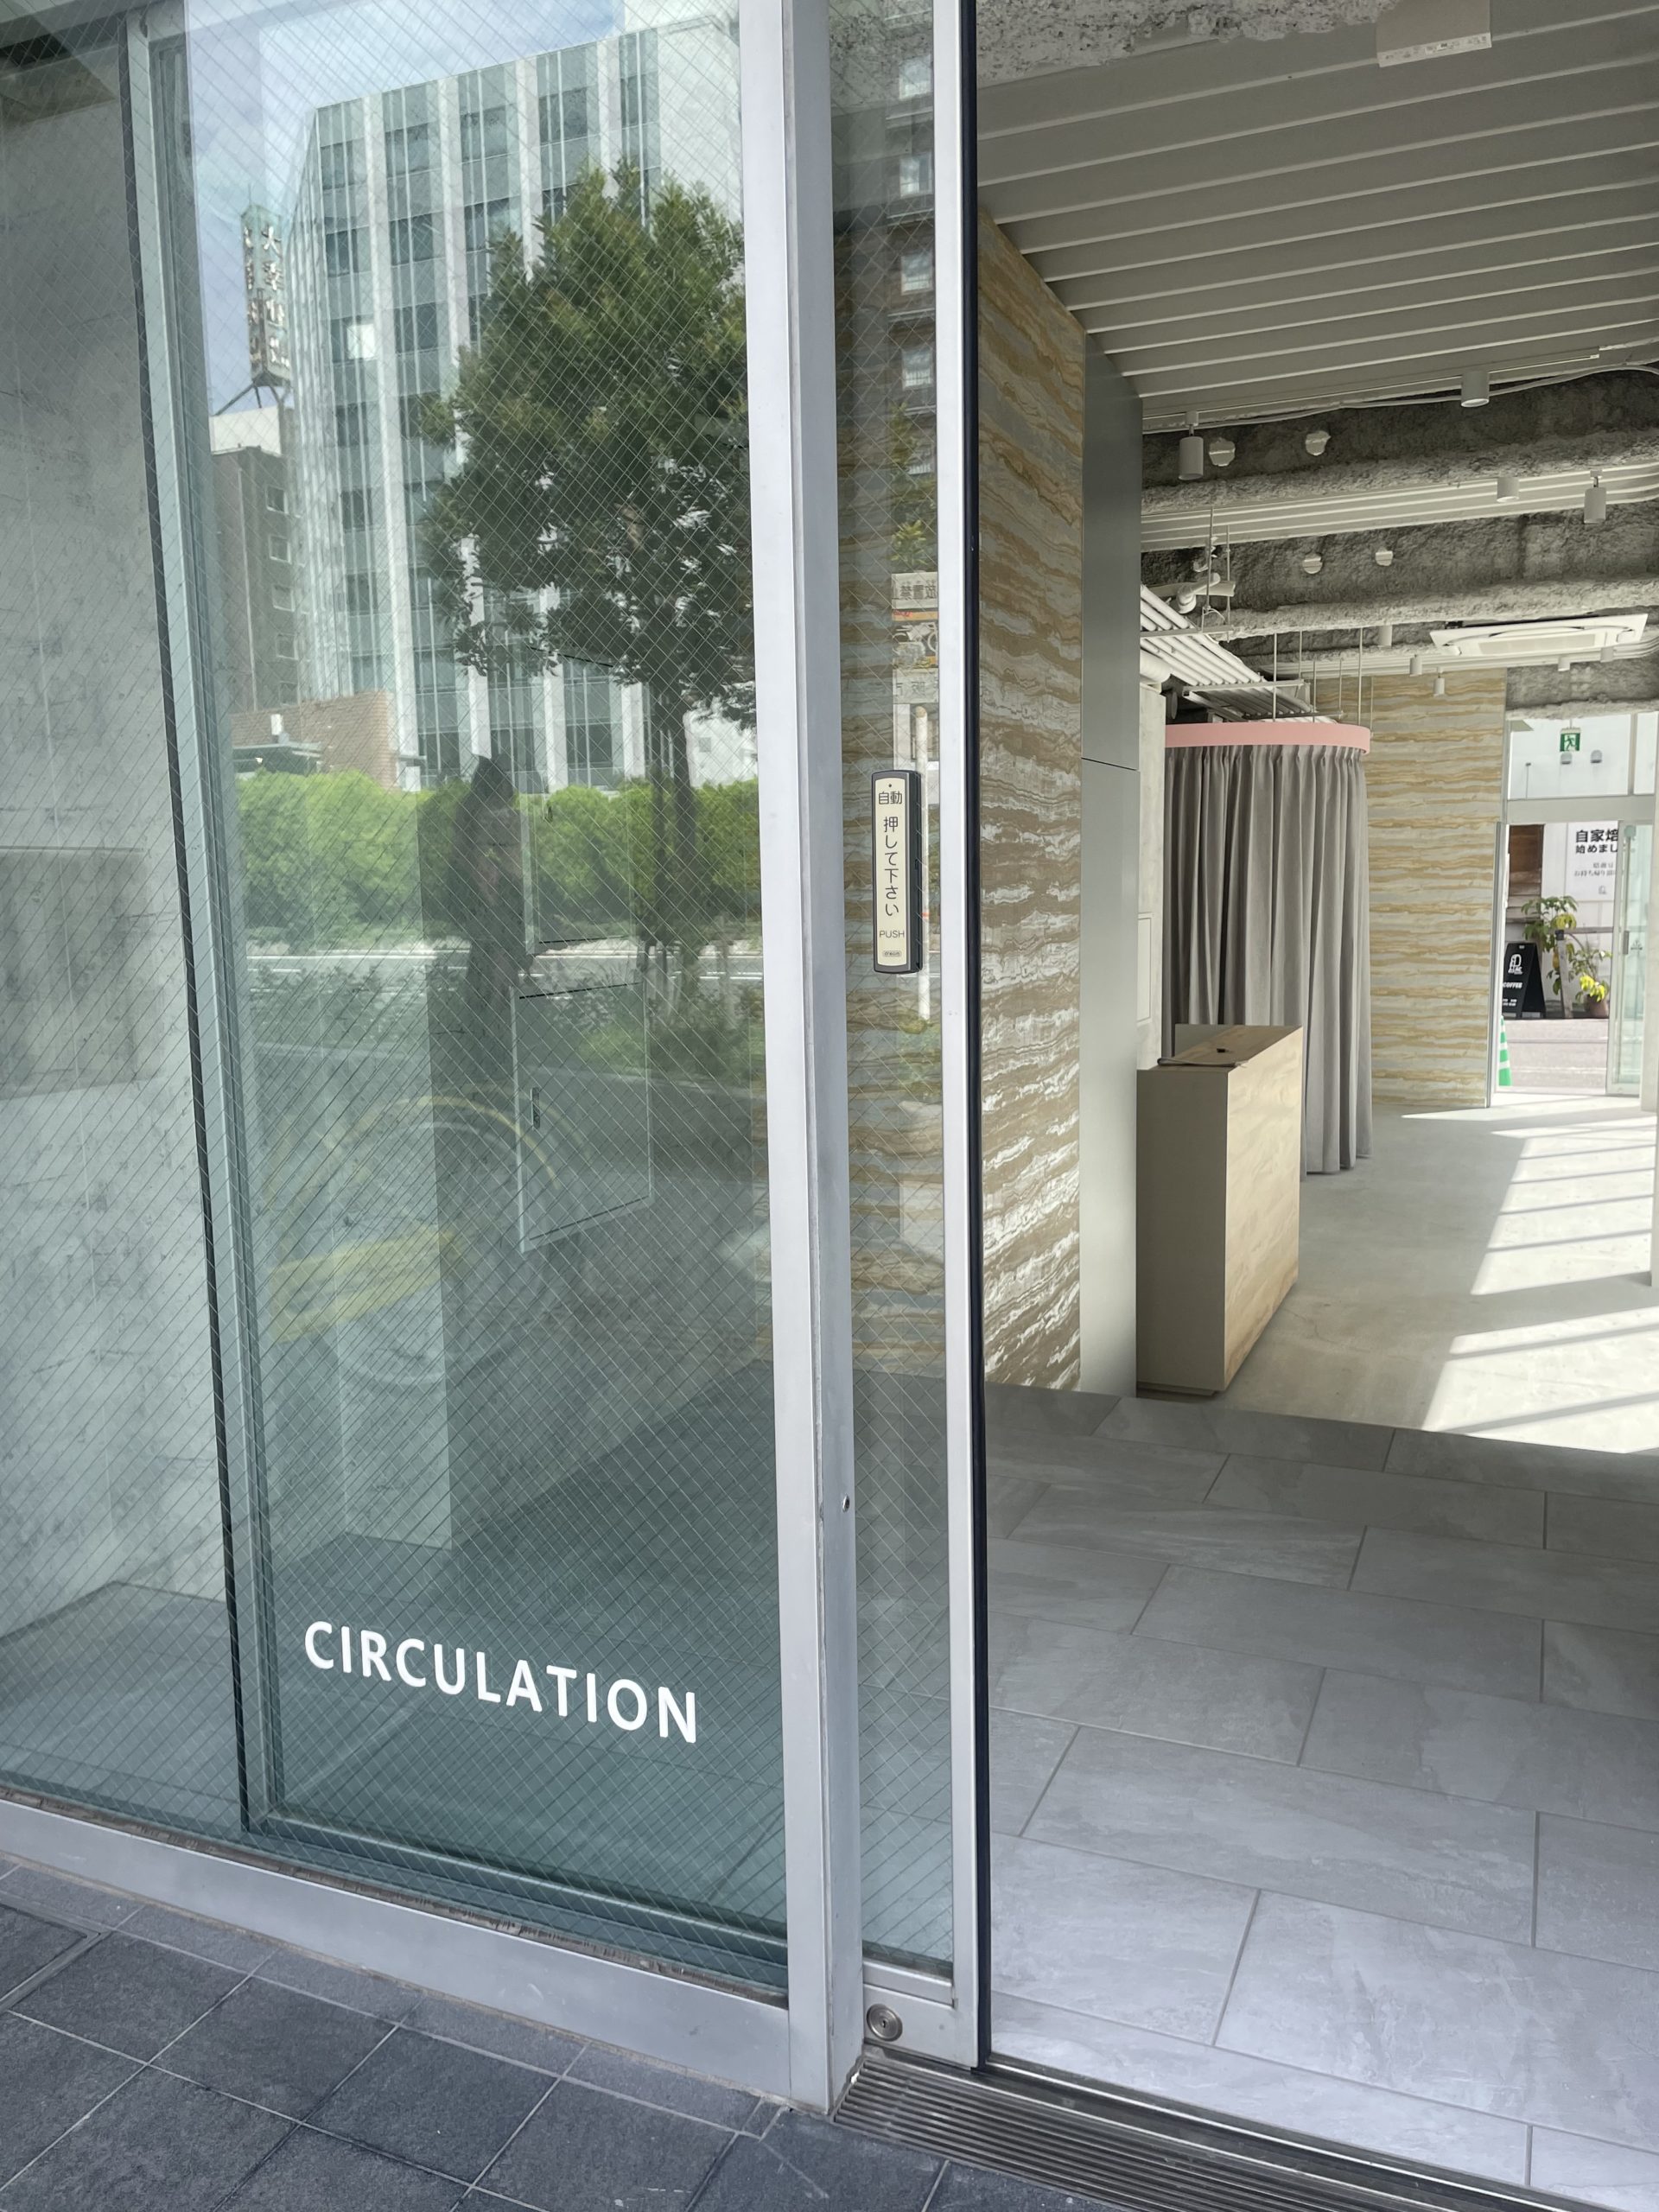 2021,09,28(TUE) 『CIRCULATION OSAKA』Relocation Open to Kitahorie 株式会社サーキュレーション